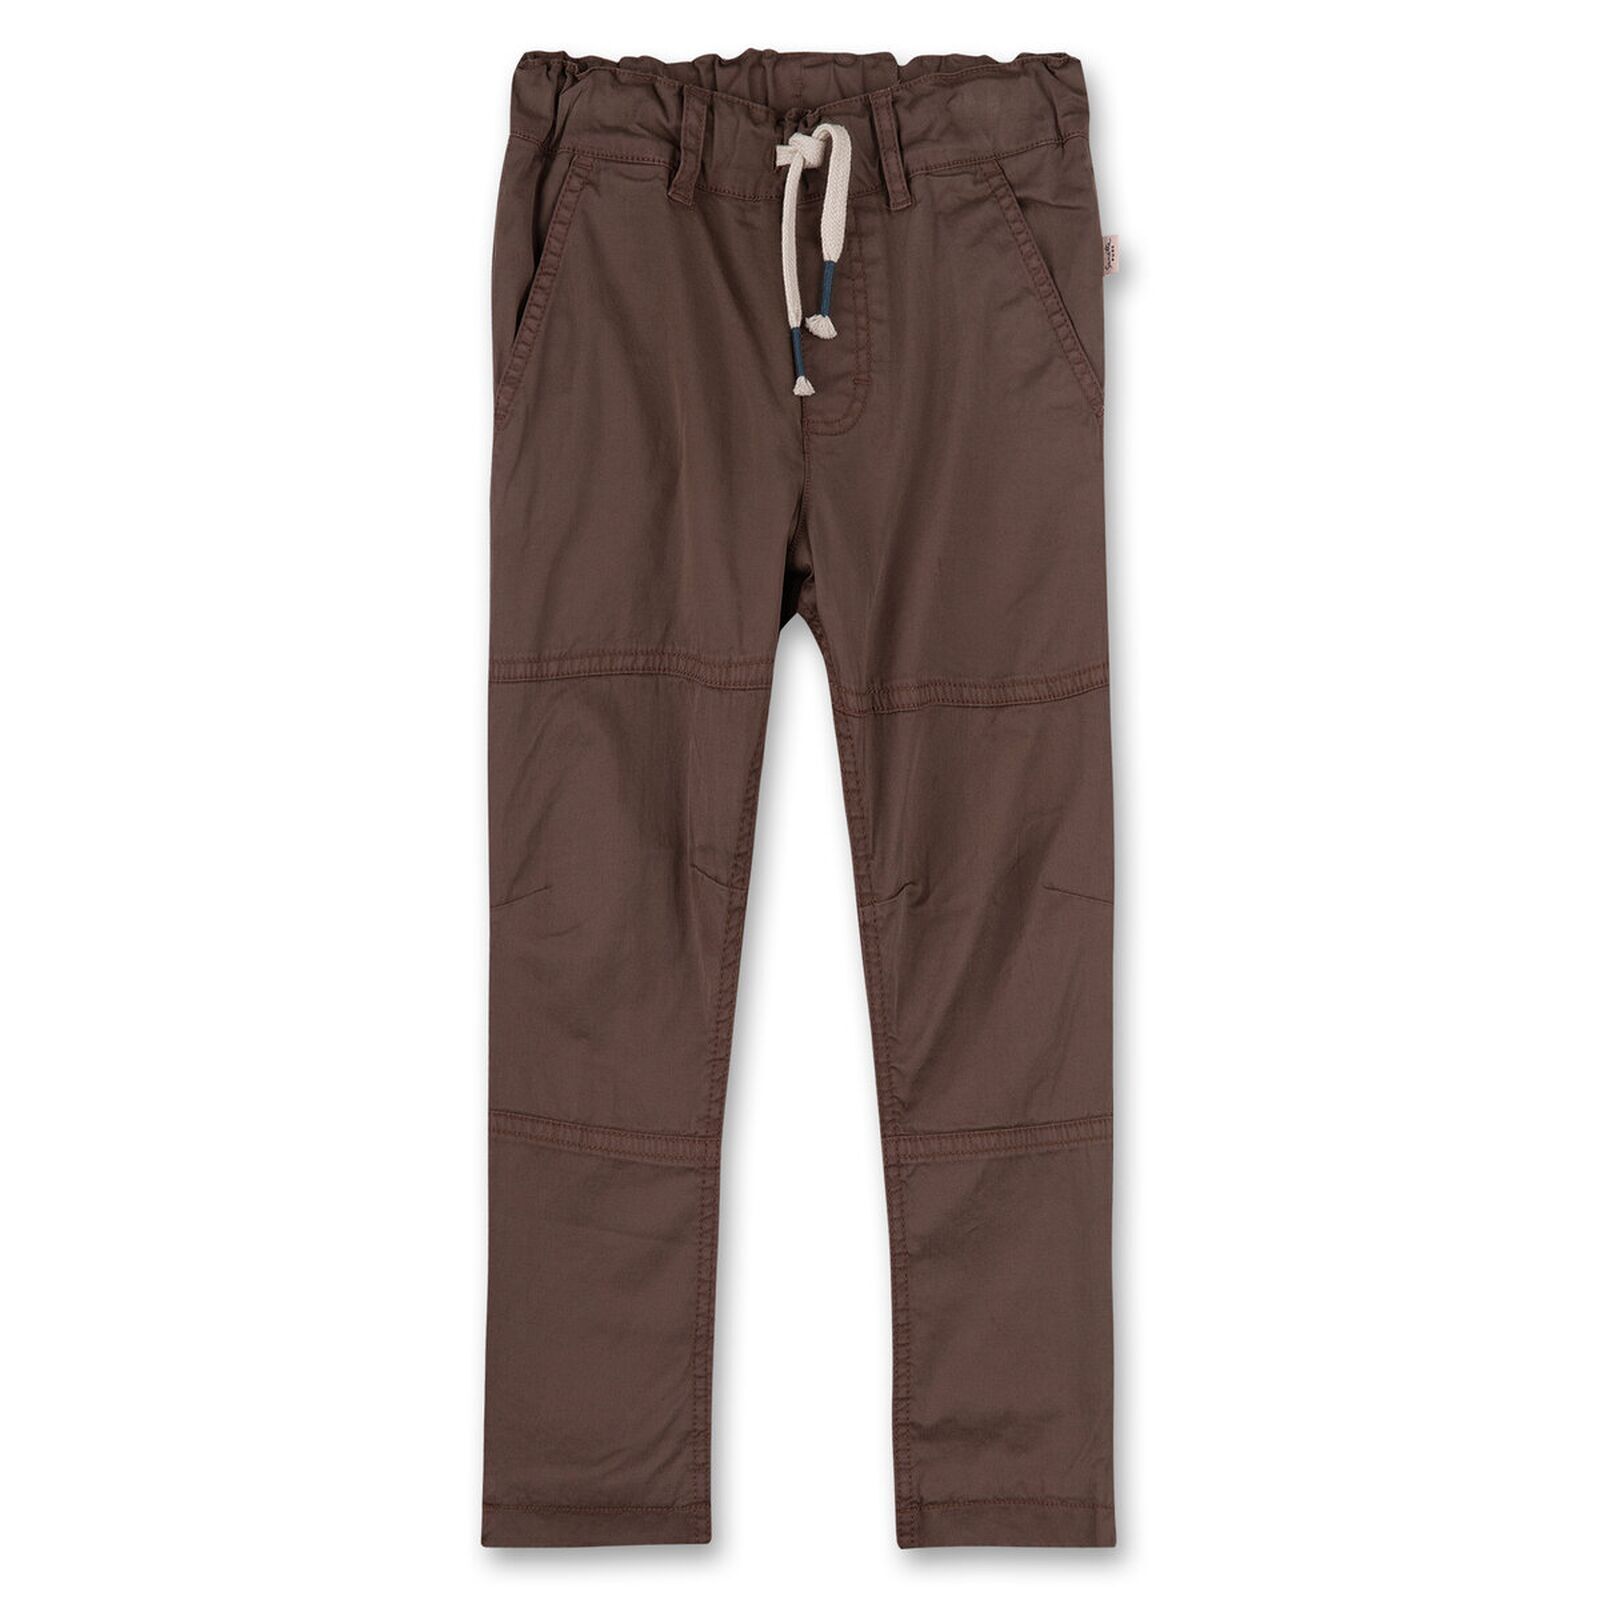 Trousers lined brown 68